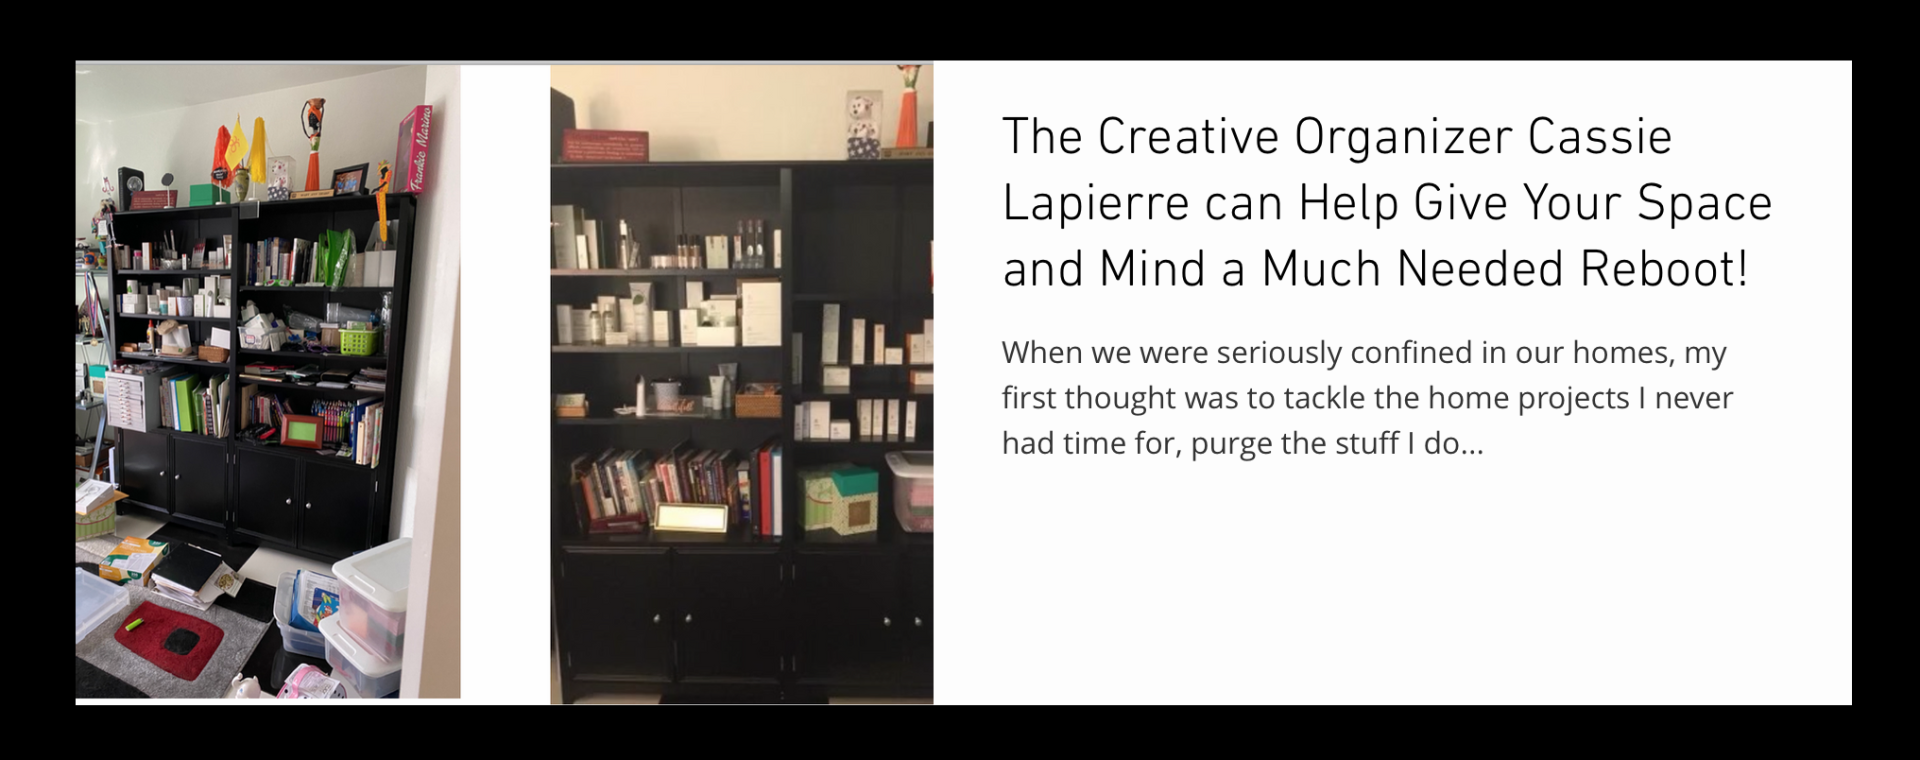 Creative organizer featured in The Six 1